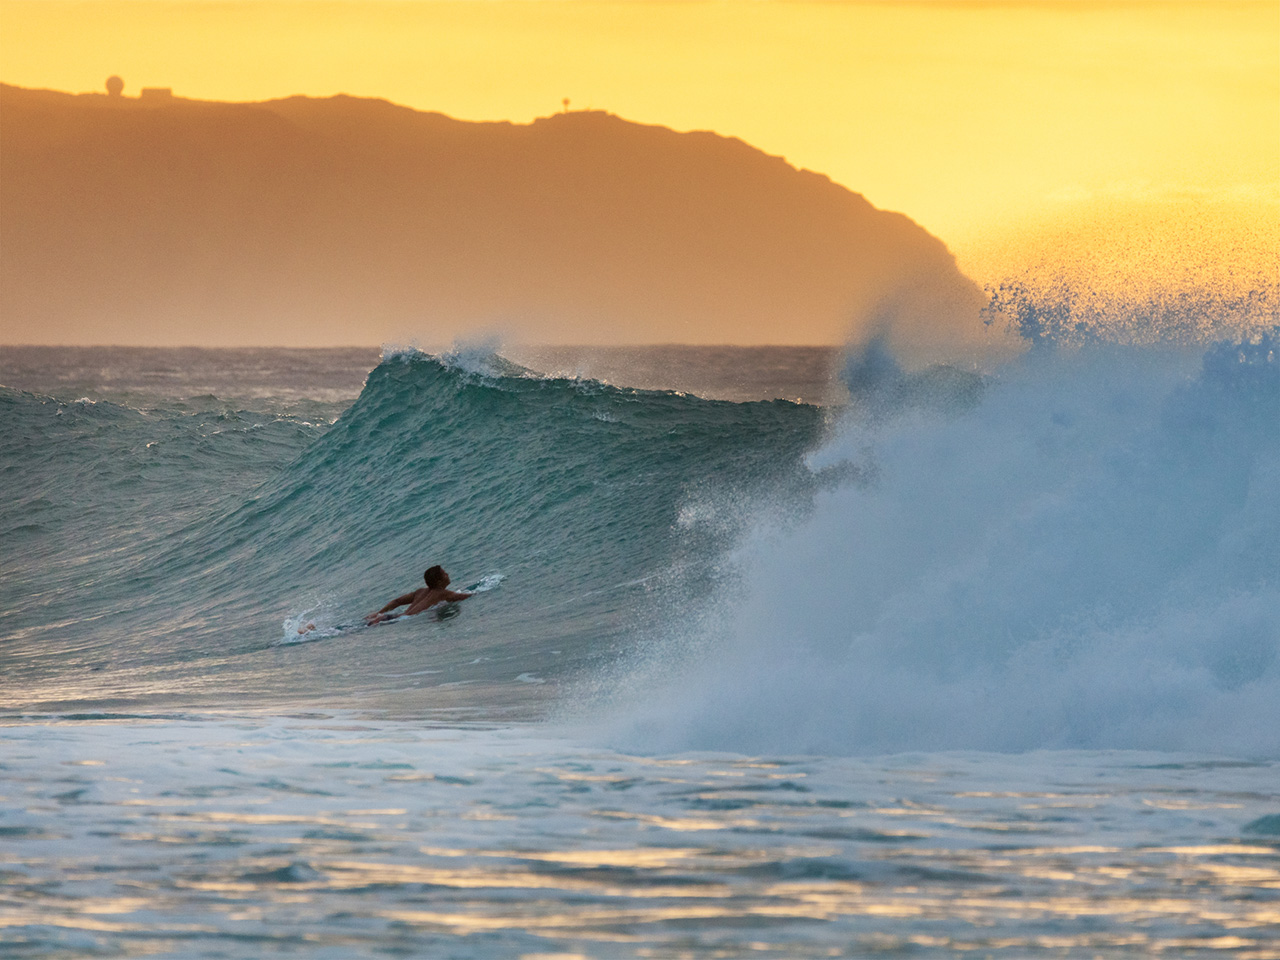 At sunset, a surfer paddes into a wave at banzai pipeline on Oahu's north shore.